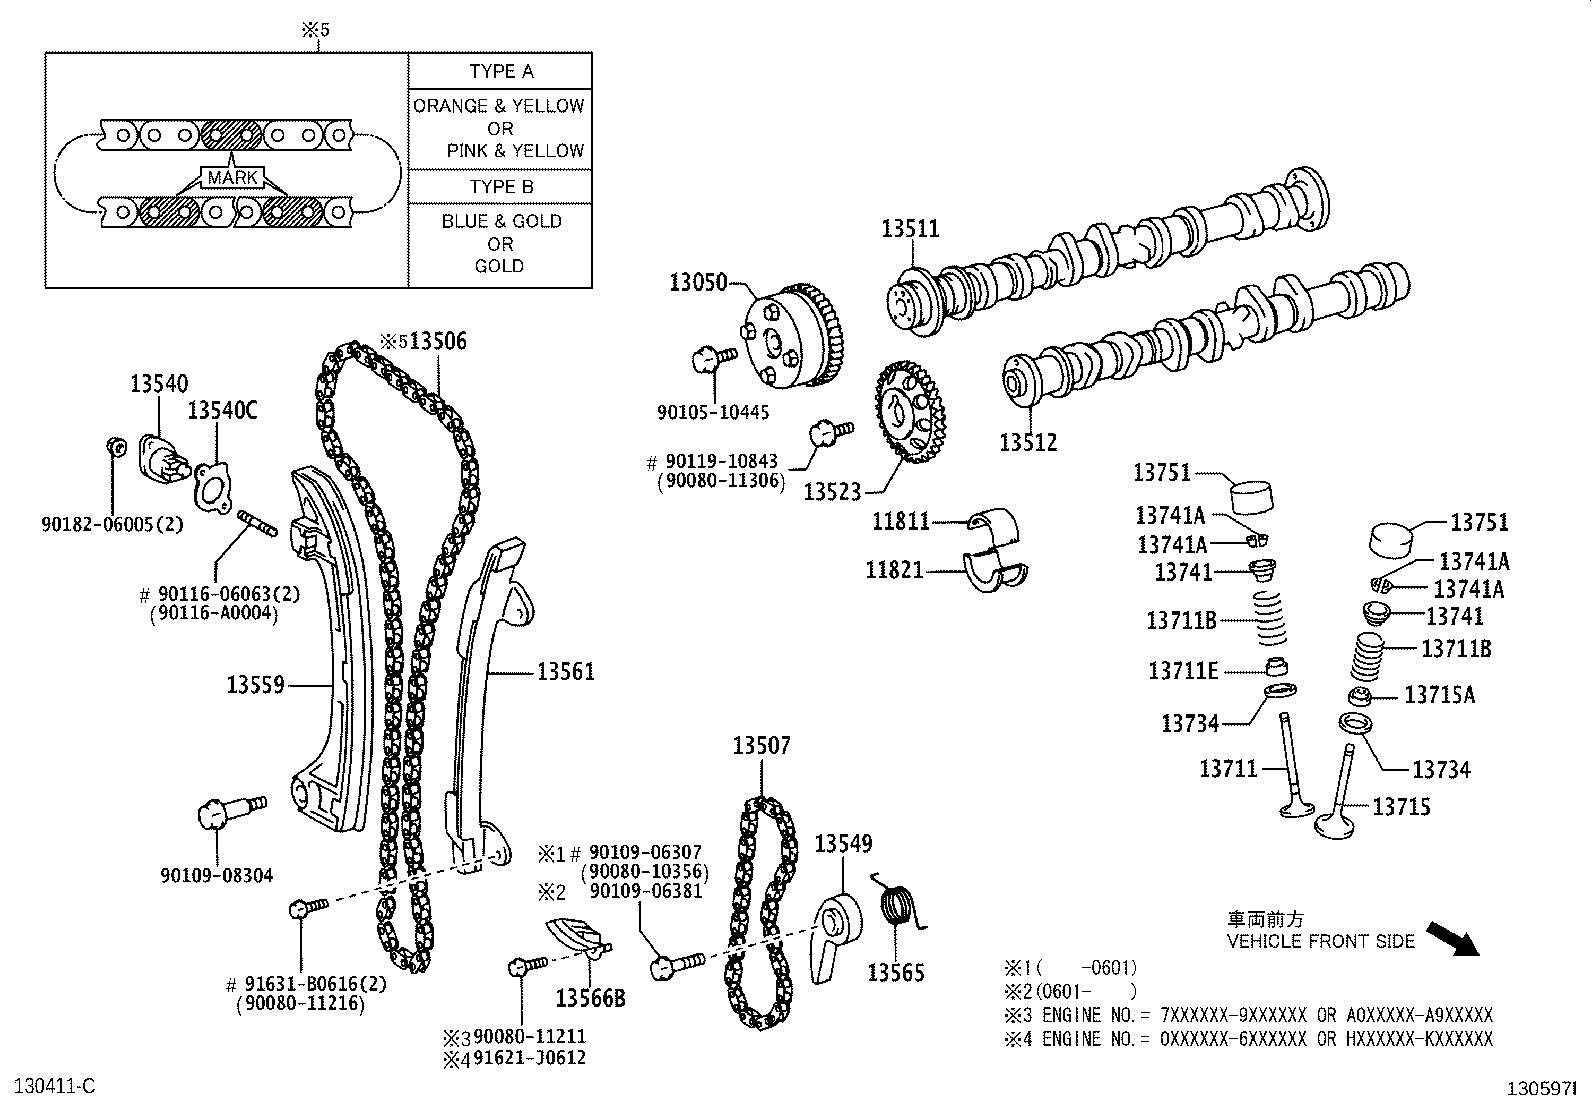 2004 toyota Camry Engine Layout 30 2004 toyota Camry Parts Diagram Wire Diagram source Information Of 2004 toyota Camry Engine Layout